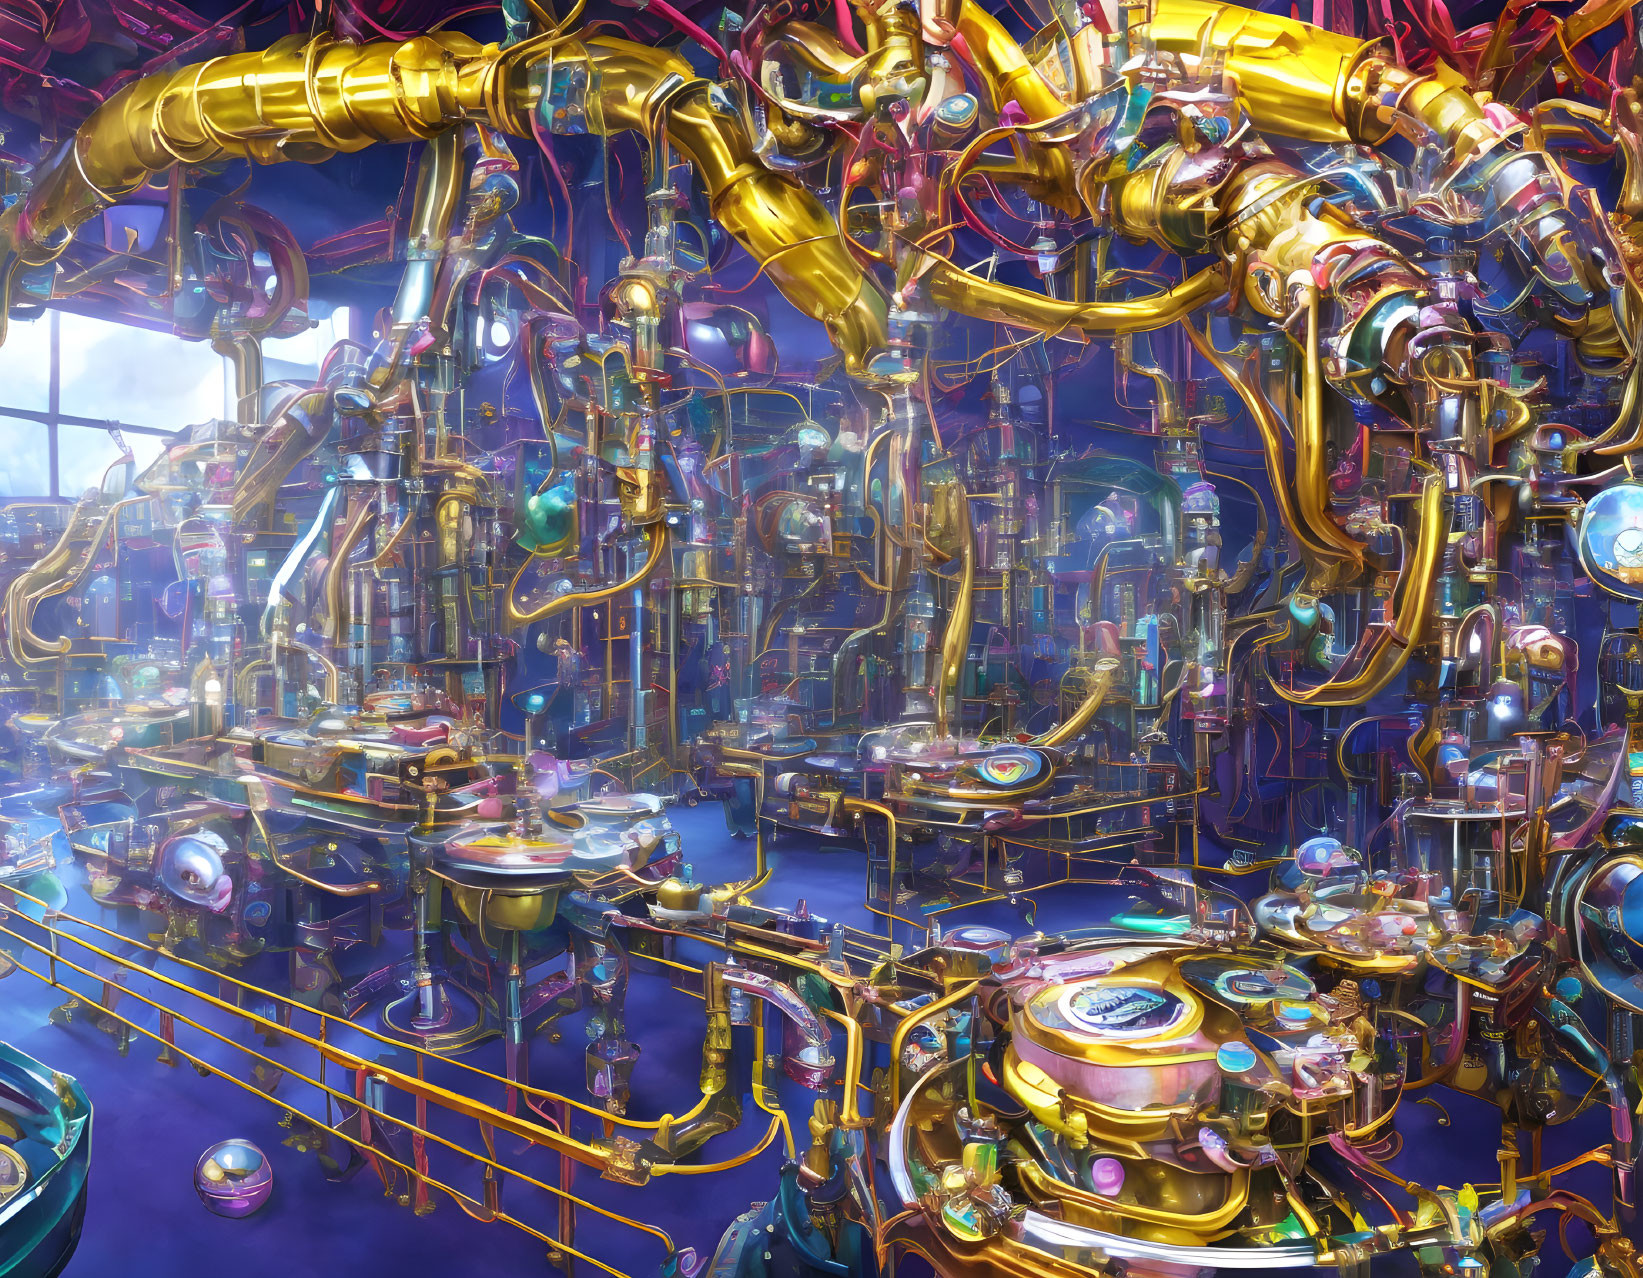 Futuristic Machinery Landscape with Golden Pipes and Glass Tubes